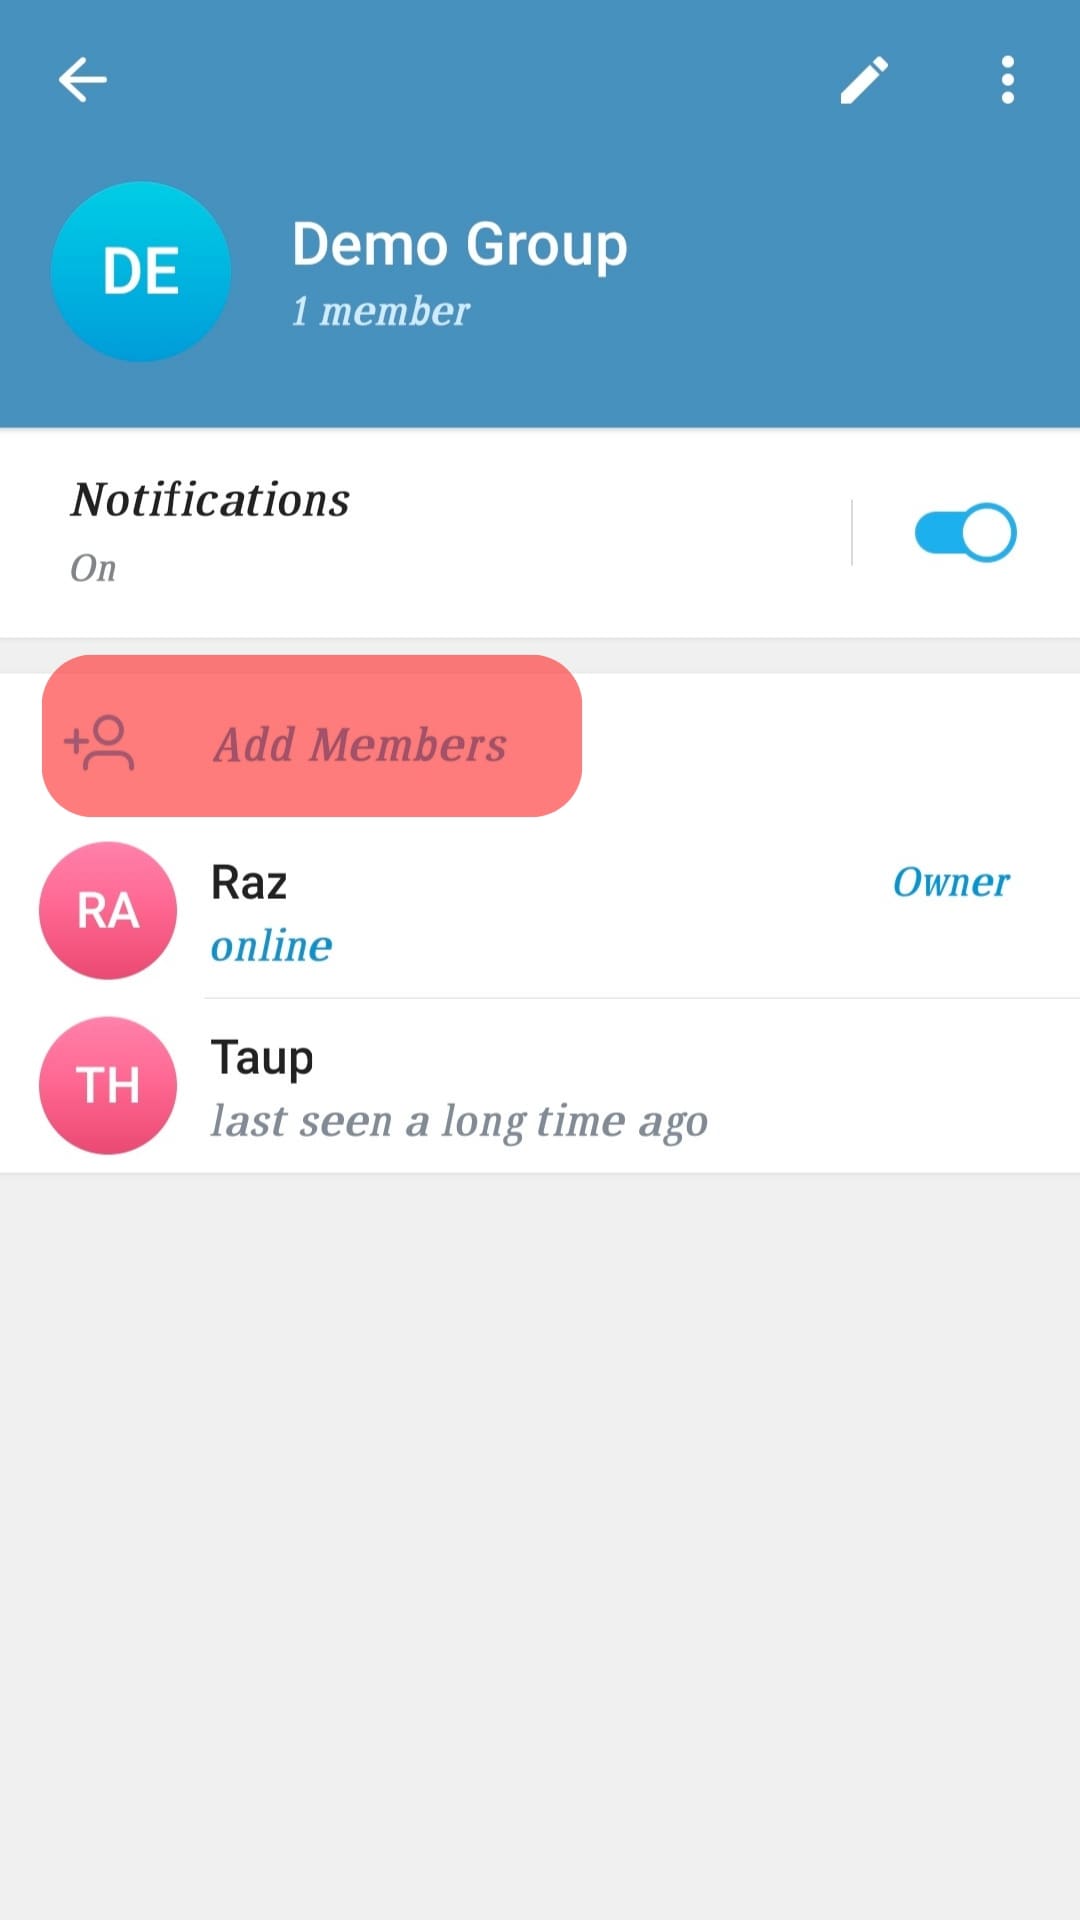 Tap The Add Member Option.